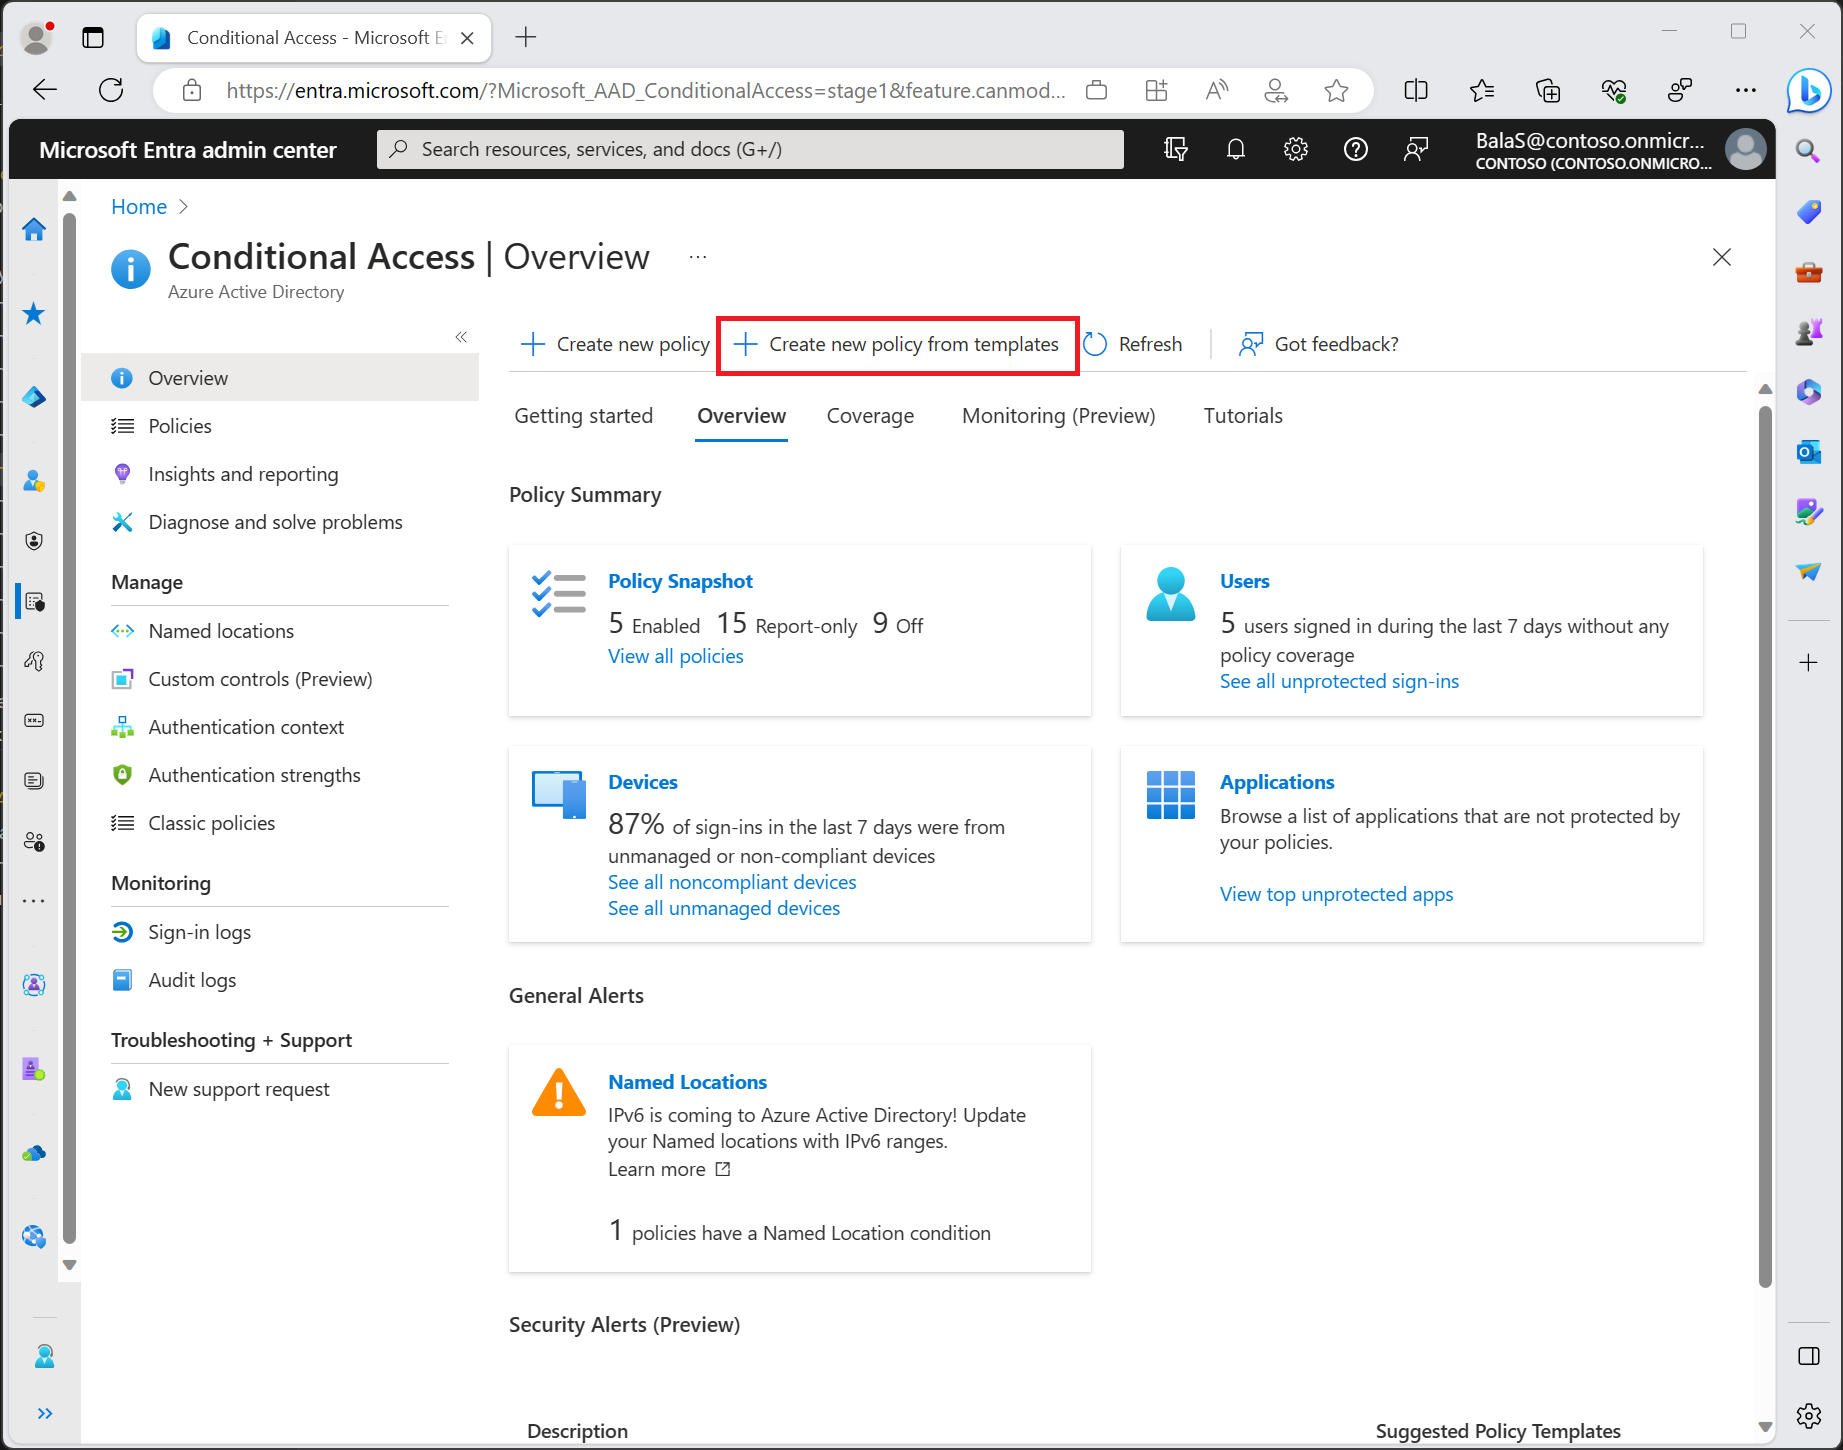 Conditional Access policies and templates in the Azure portal.